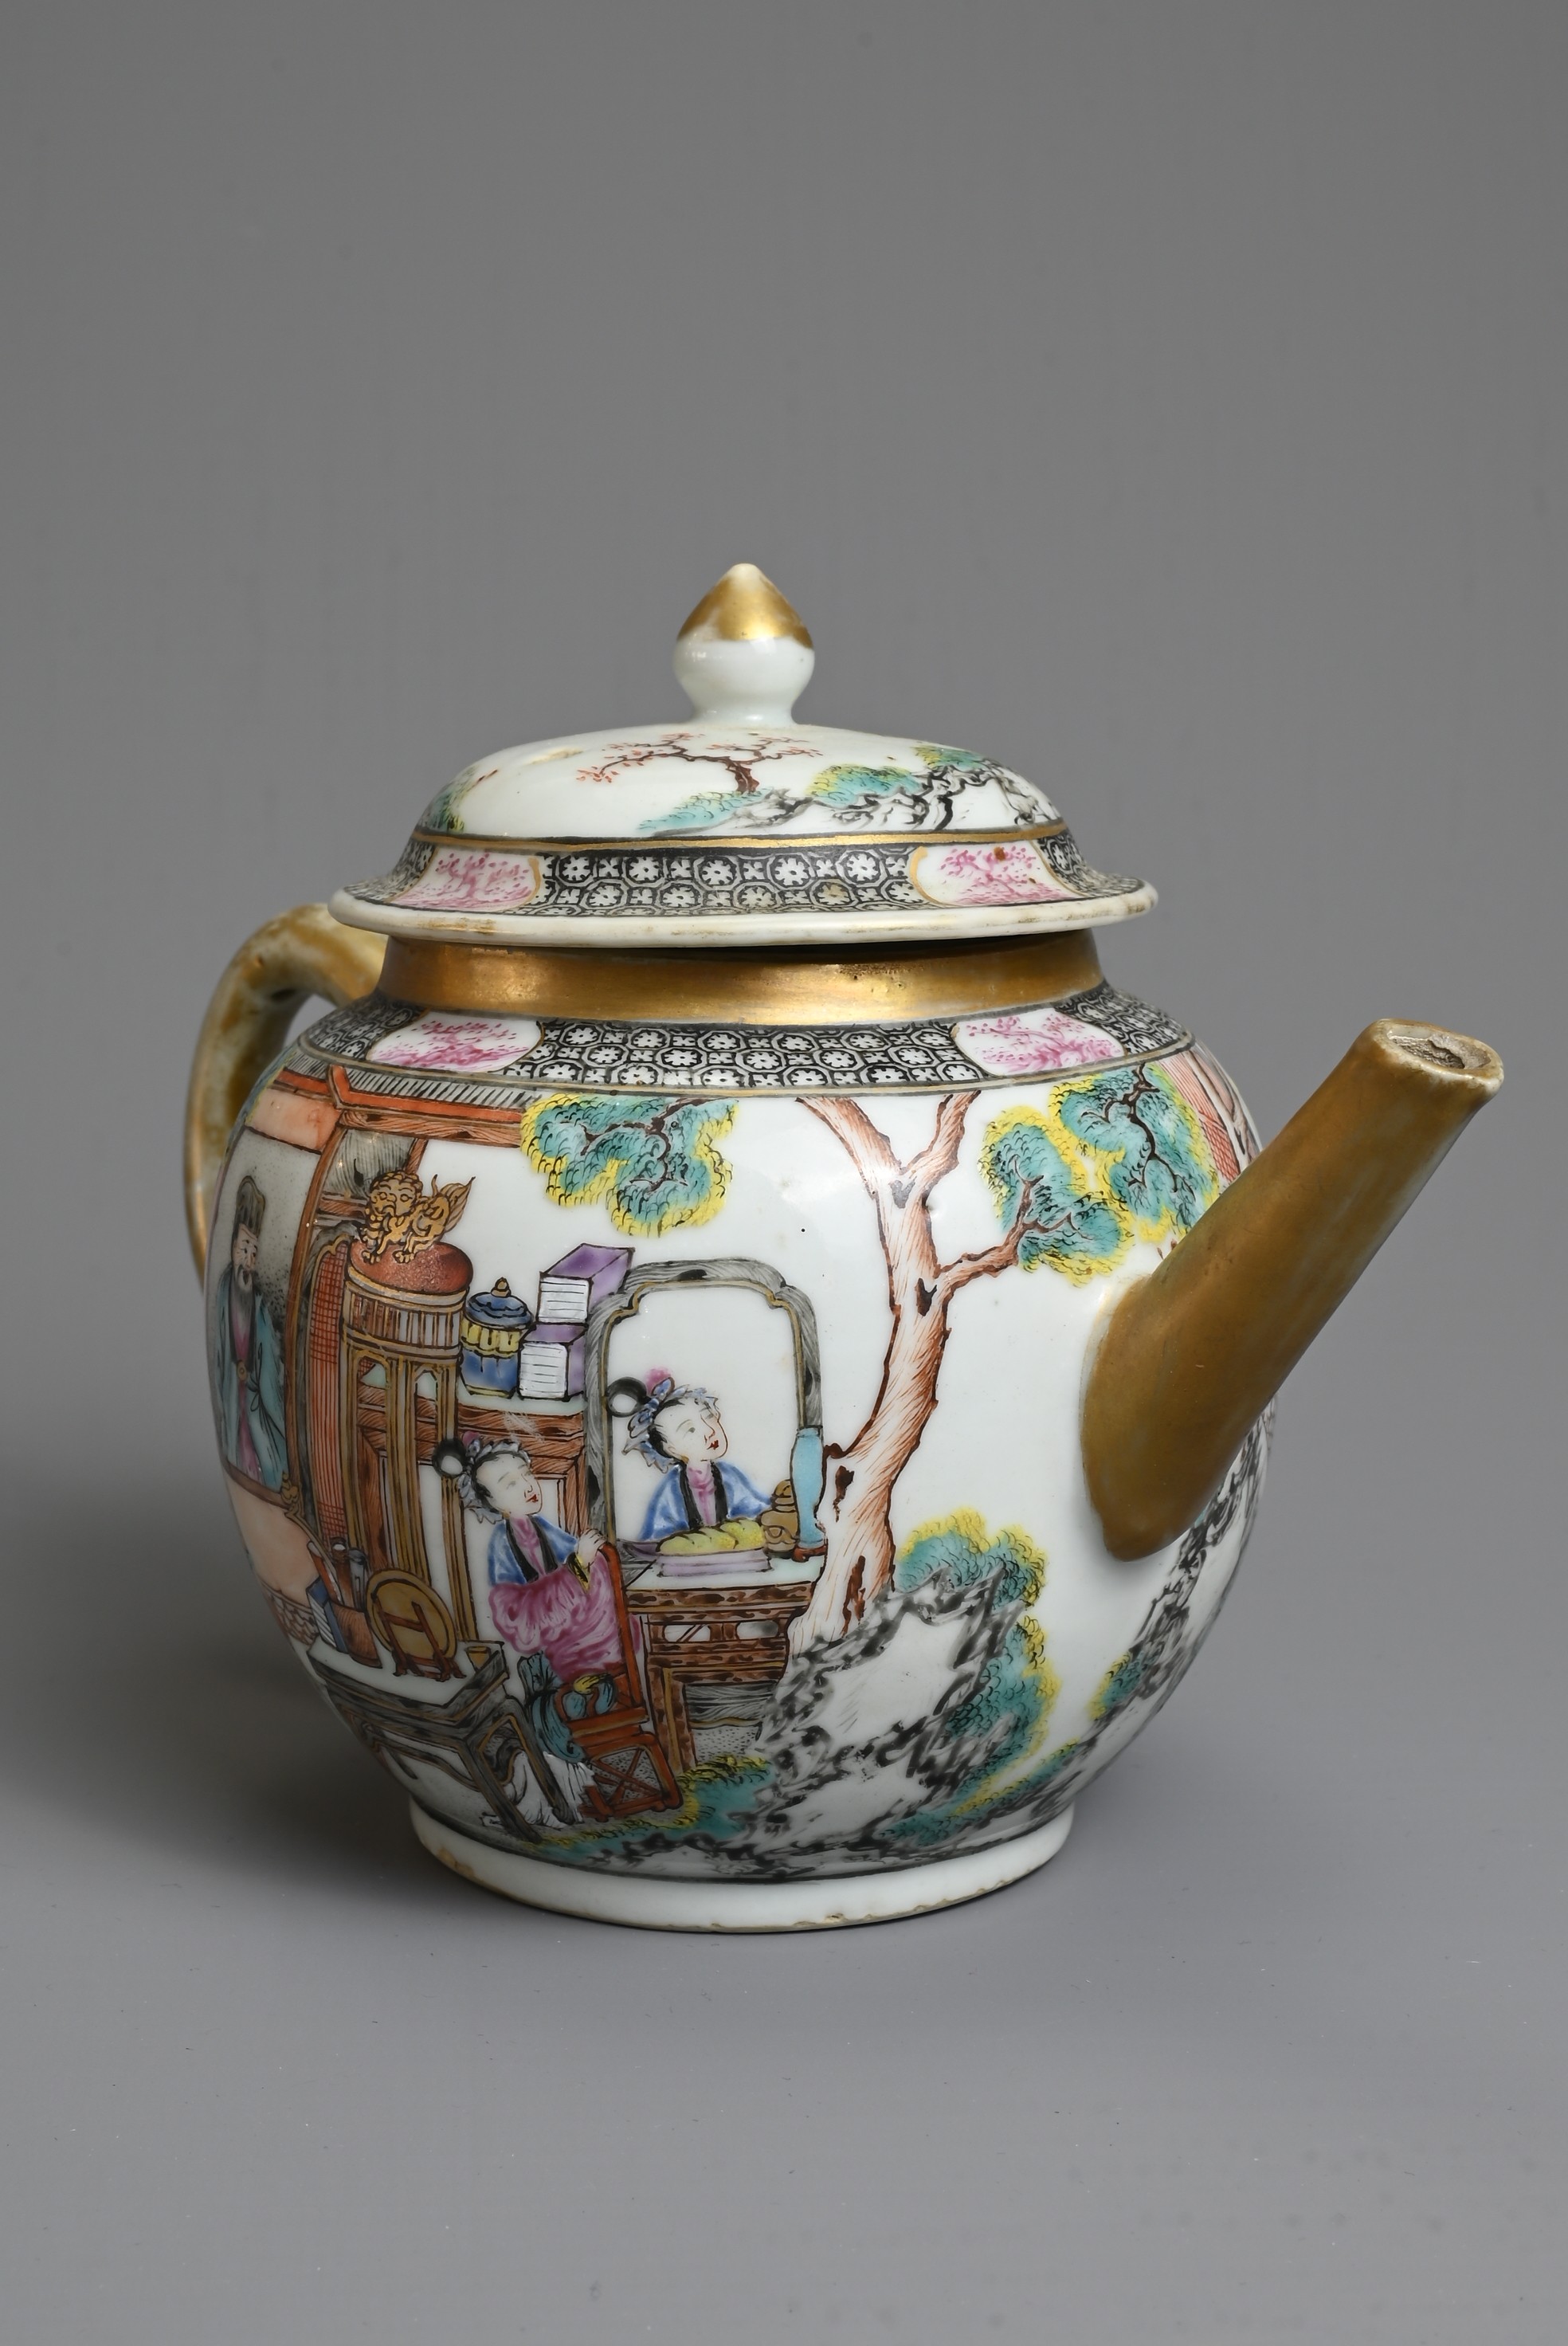 A FINE CHINESE FAMILLE ROSE PORCELAIN TEAPOT, 18TH CENTURY - Image 5 of 21